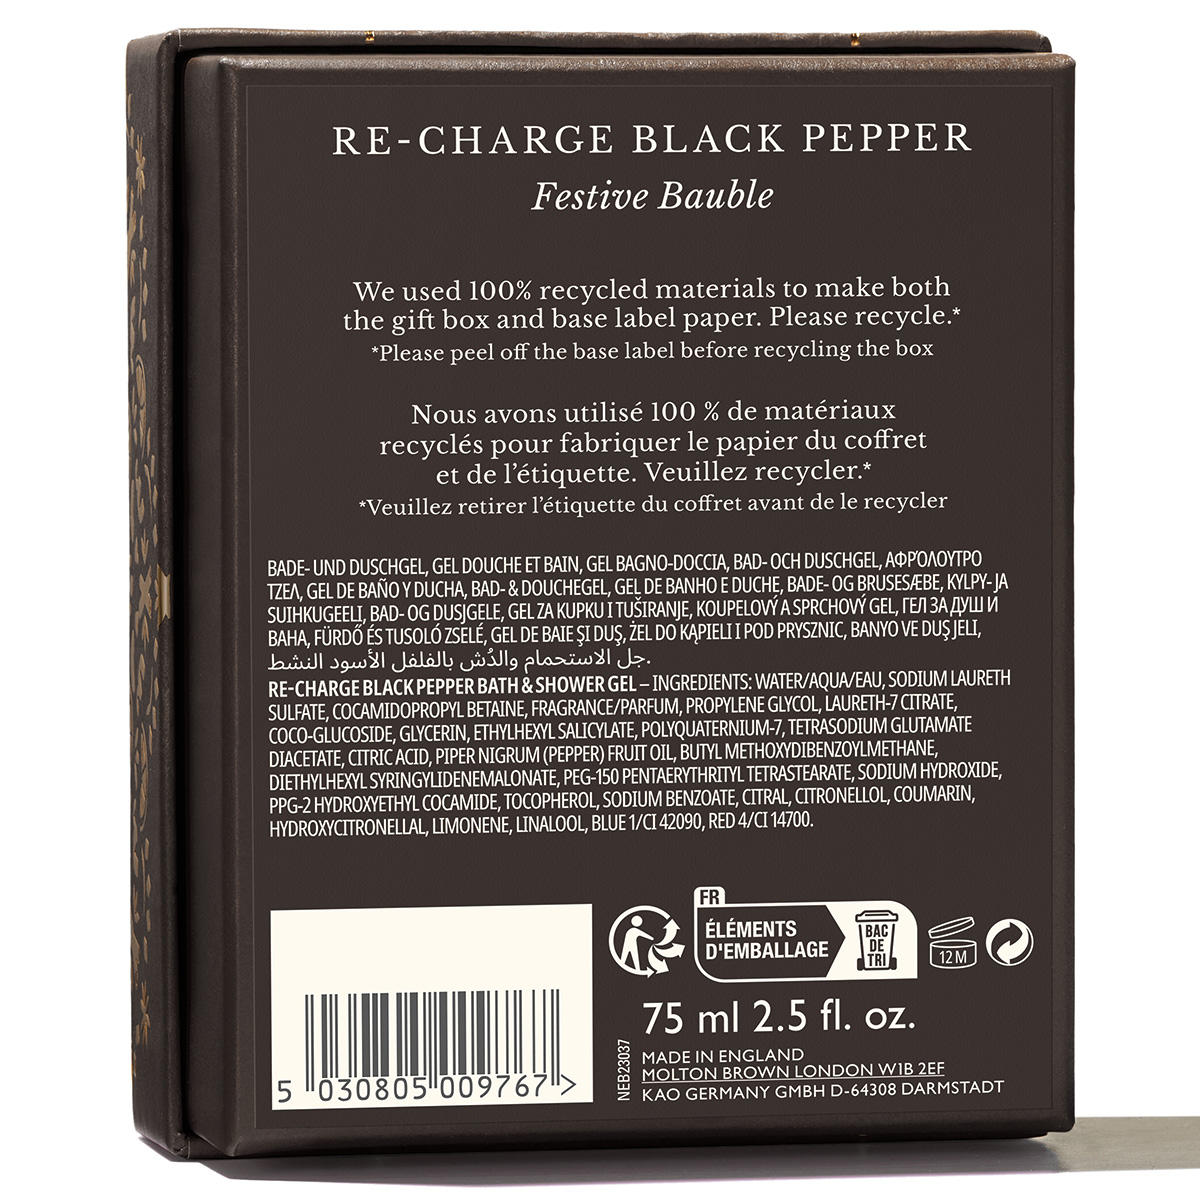 MOLTON BROWN Re-charge Black Pepper Festive Bauble 75 ml - 4